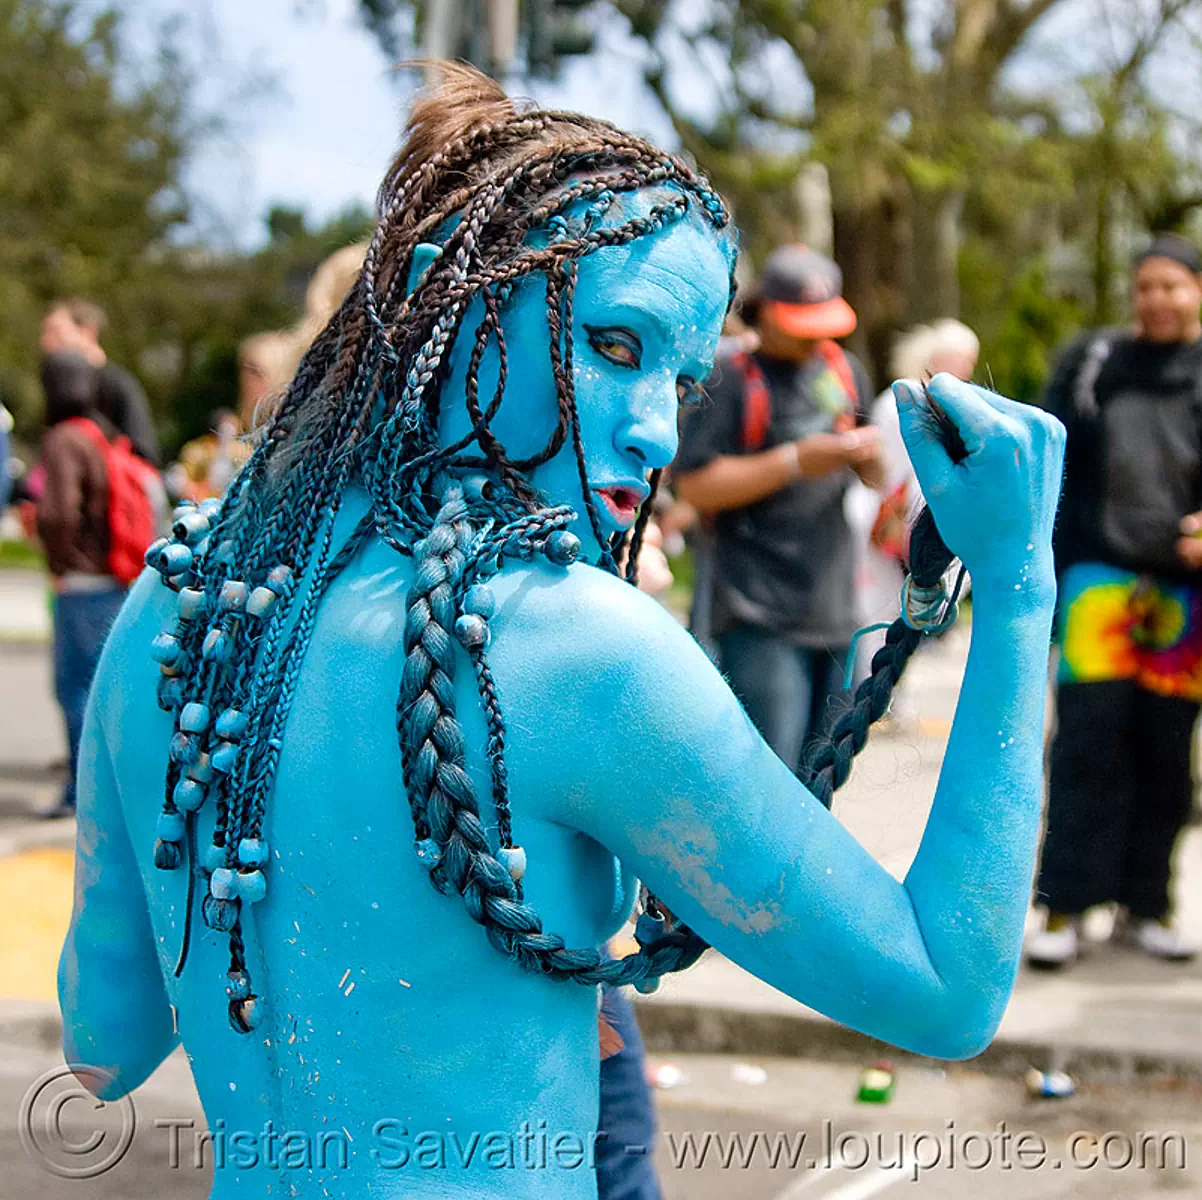 woman in avatar costume - bay to breaker footrace and street party (san francisco), avatar, bay to breakers, blue, body art, body paint, body painting, braid, braided hair, costume, footrace, hair beads, street party, woman